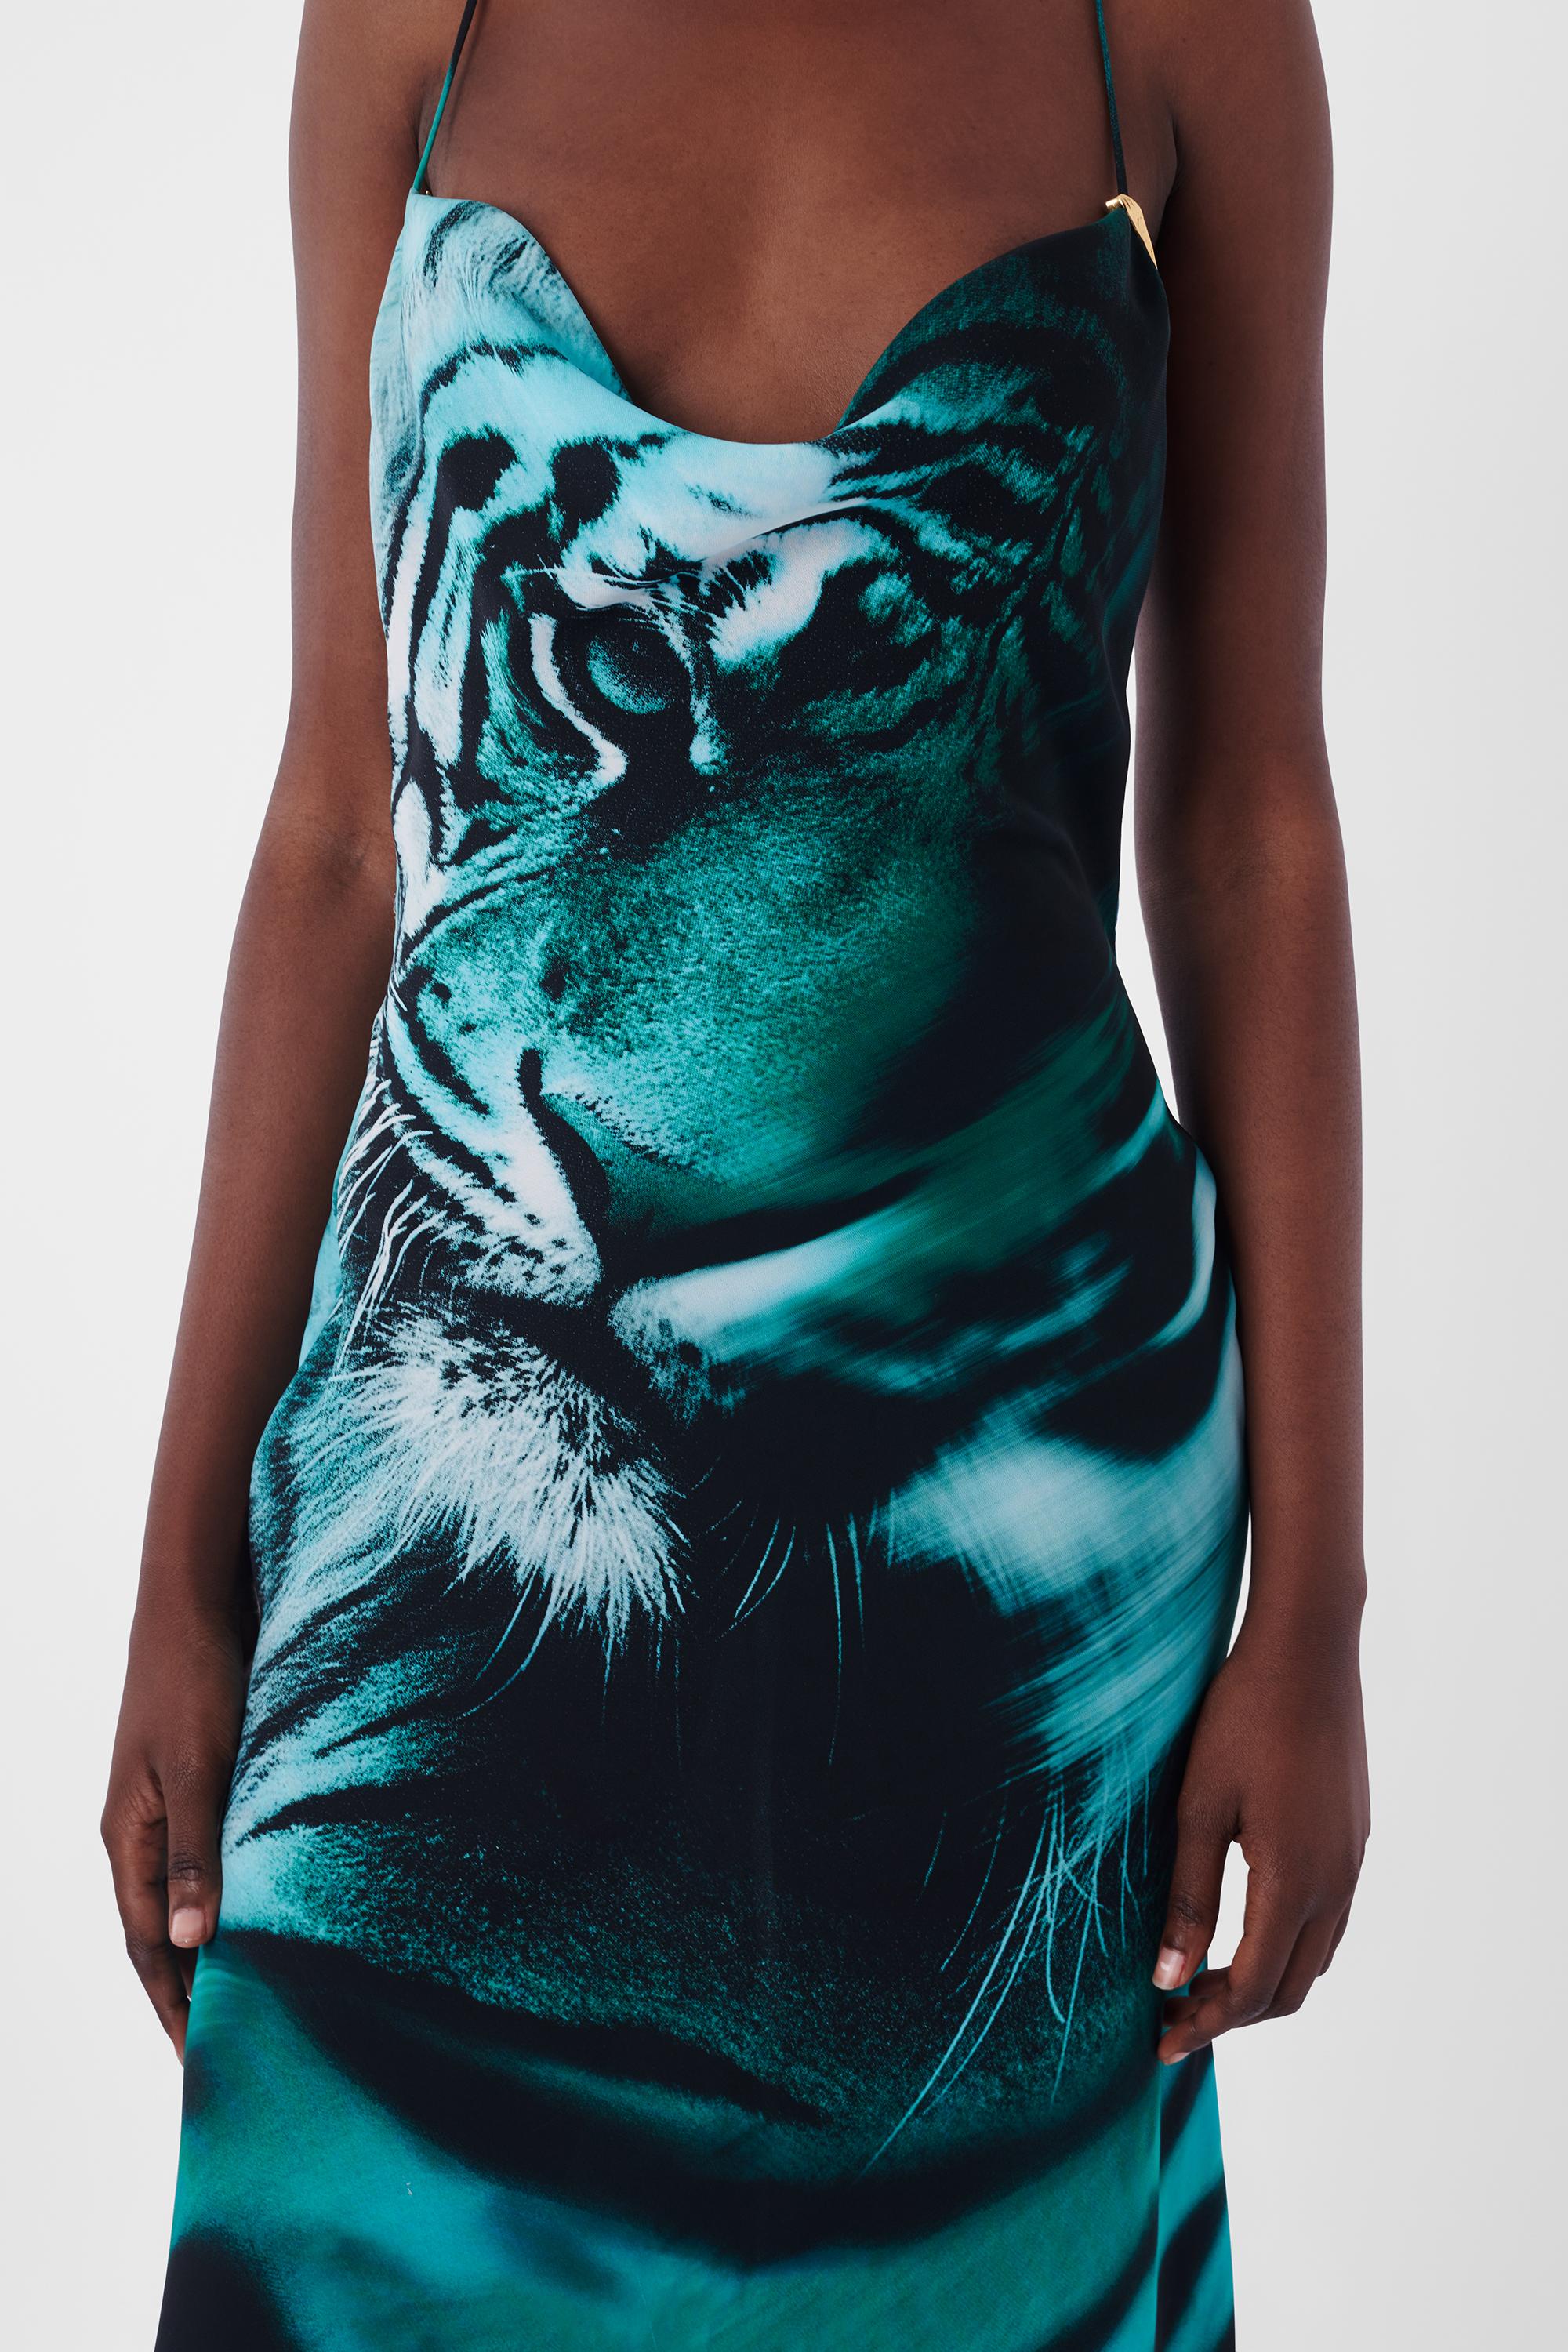 We are excited to present this incredible Roberto Cavalli S/S 2022 Blue Tiger Dress. Features cowl neck, open back with concealed zipper, gold tiger teeth on straps, asymmetric hem. In excellent vintage condition. As seen on Dua Lipa. Authenticity